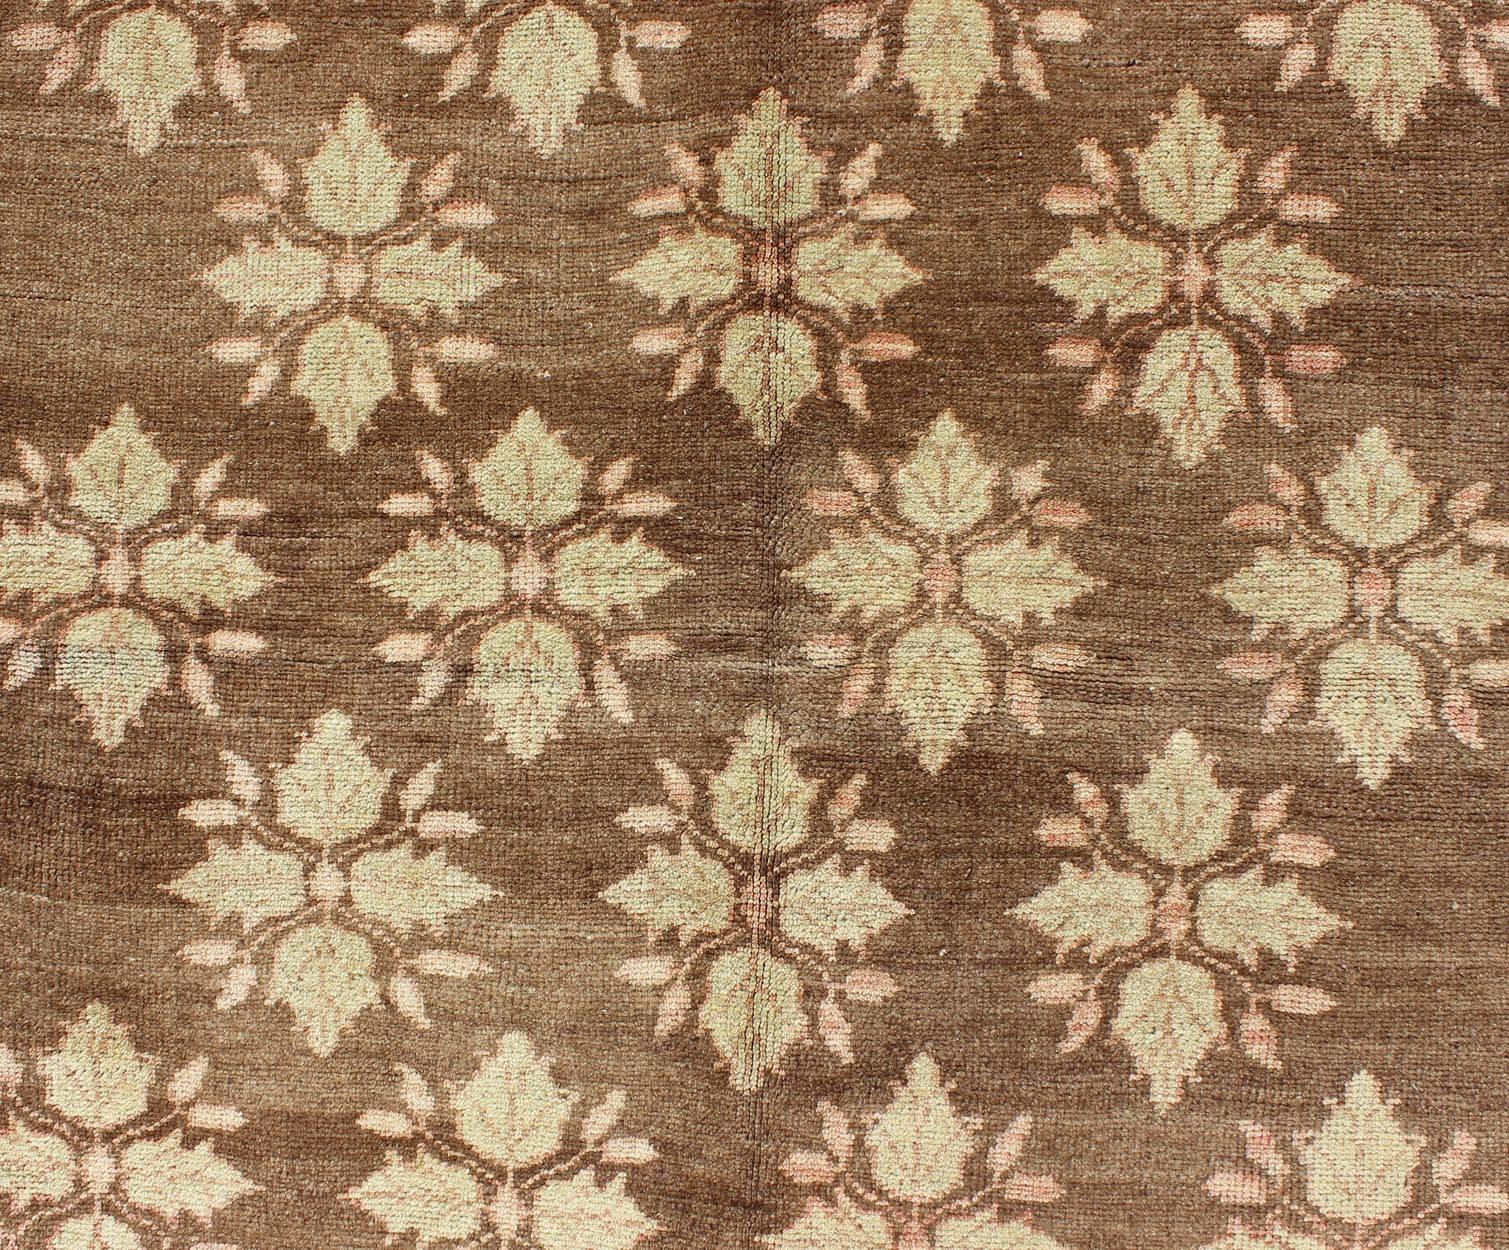 Wool Midcentury Turkish Tulu Rug with Mini Blossom Medallions in Brown and Ivory